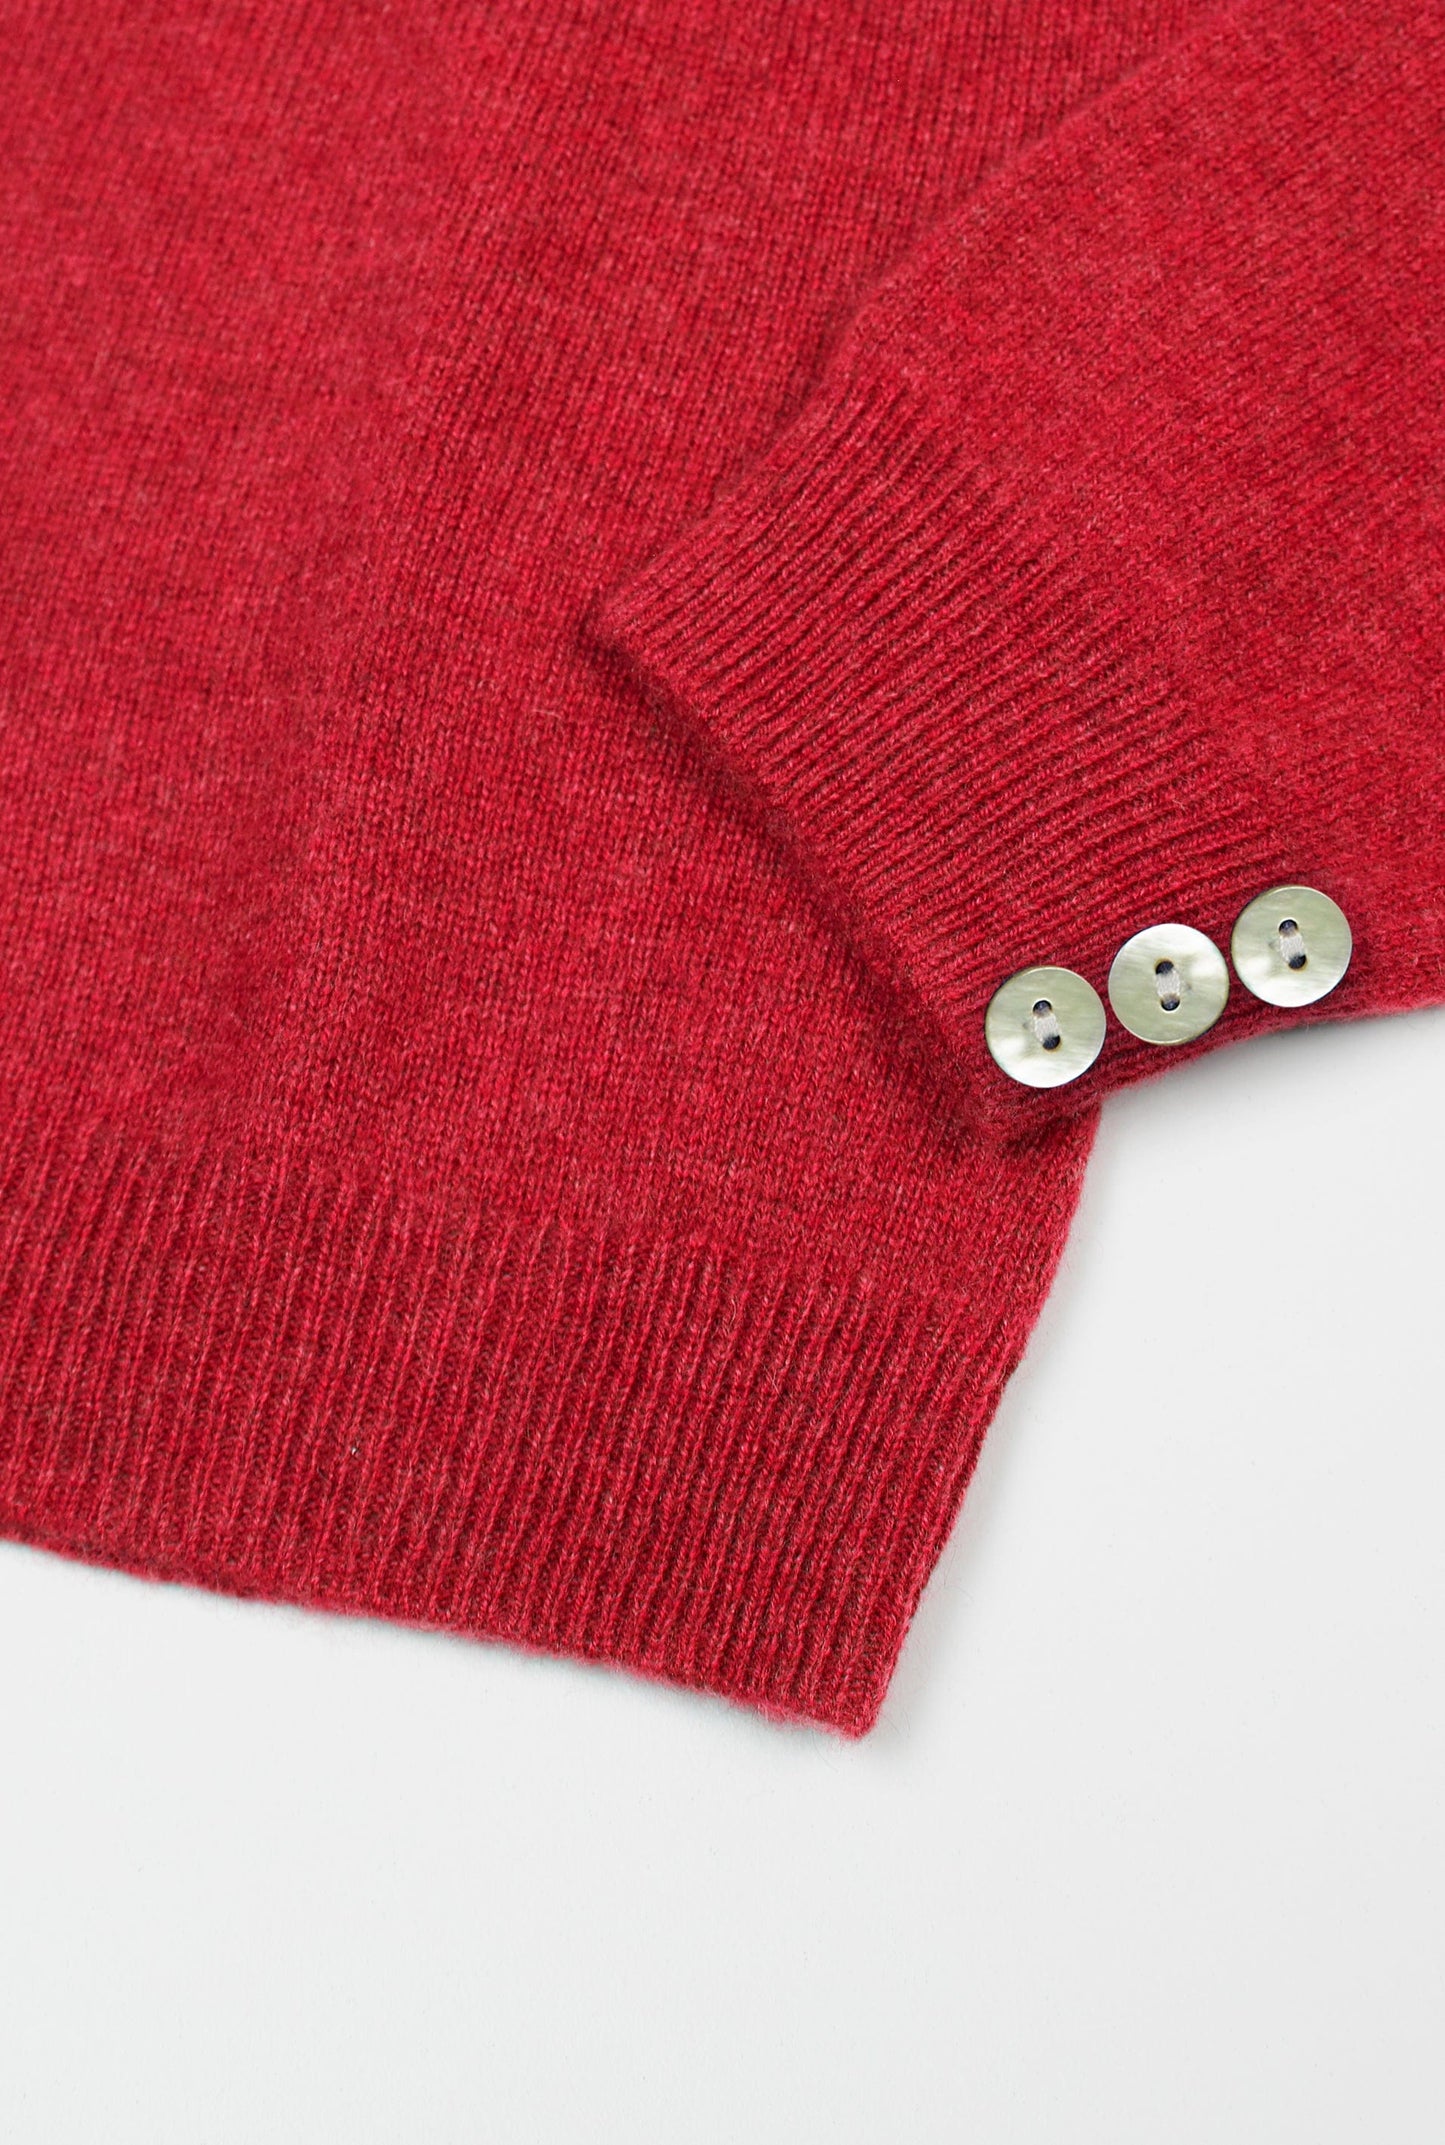 Cashmere Roll Neck in Red